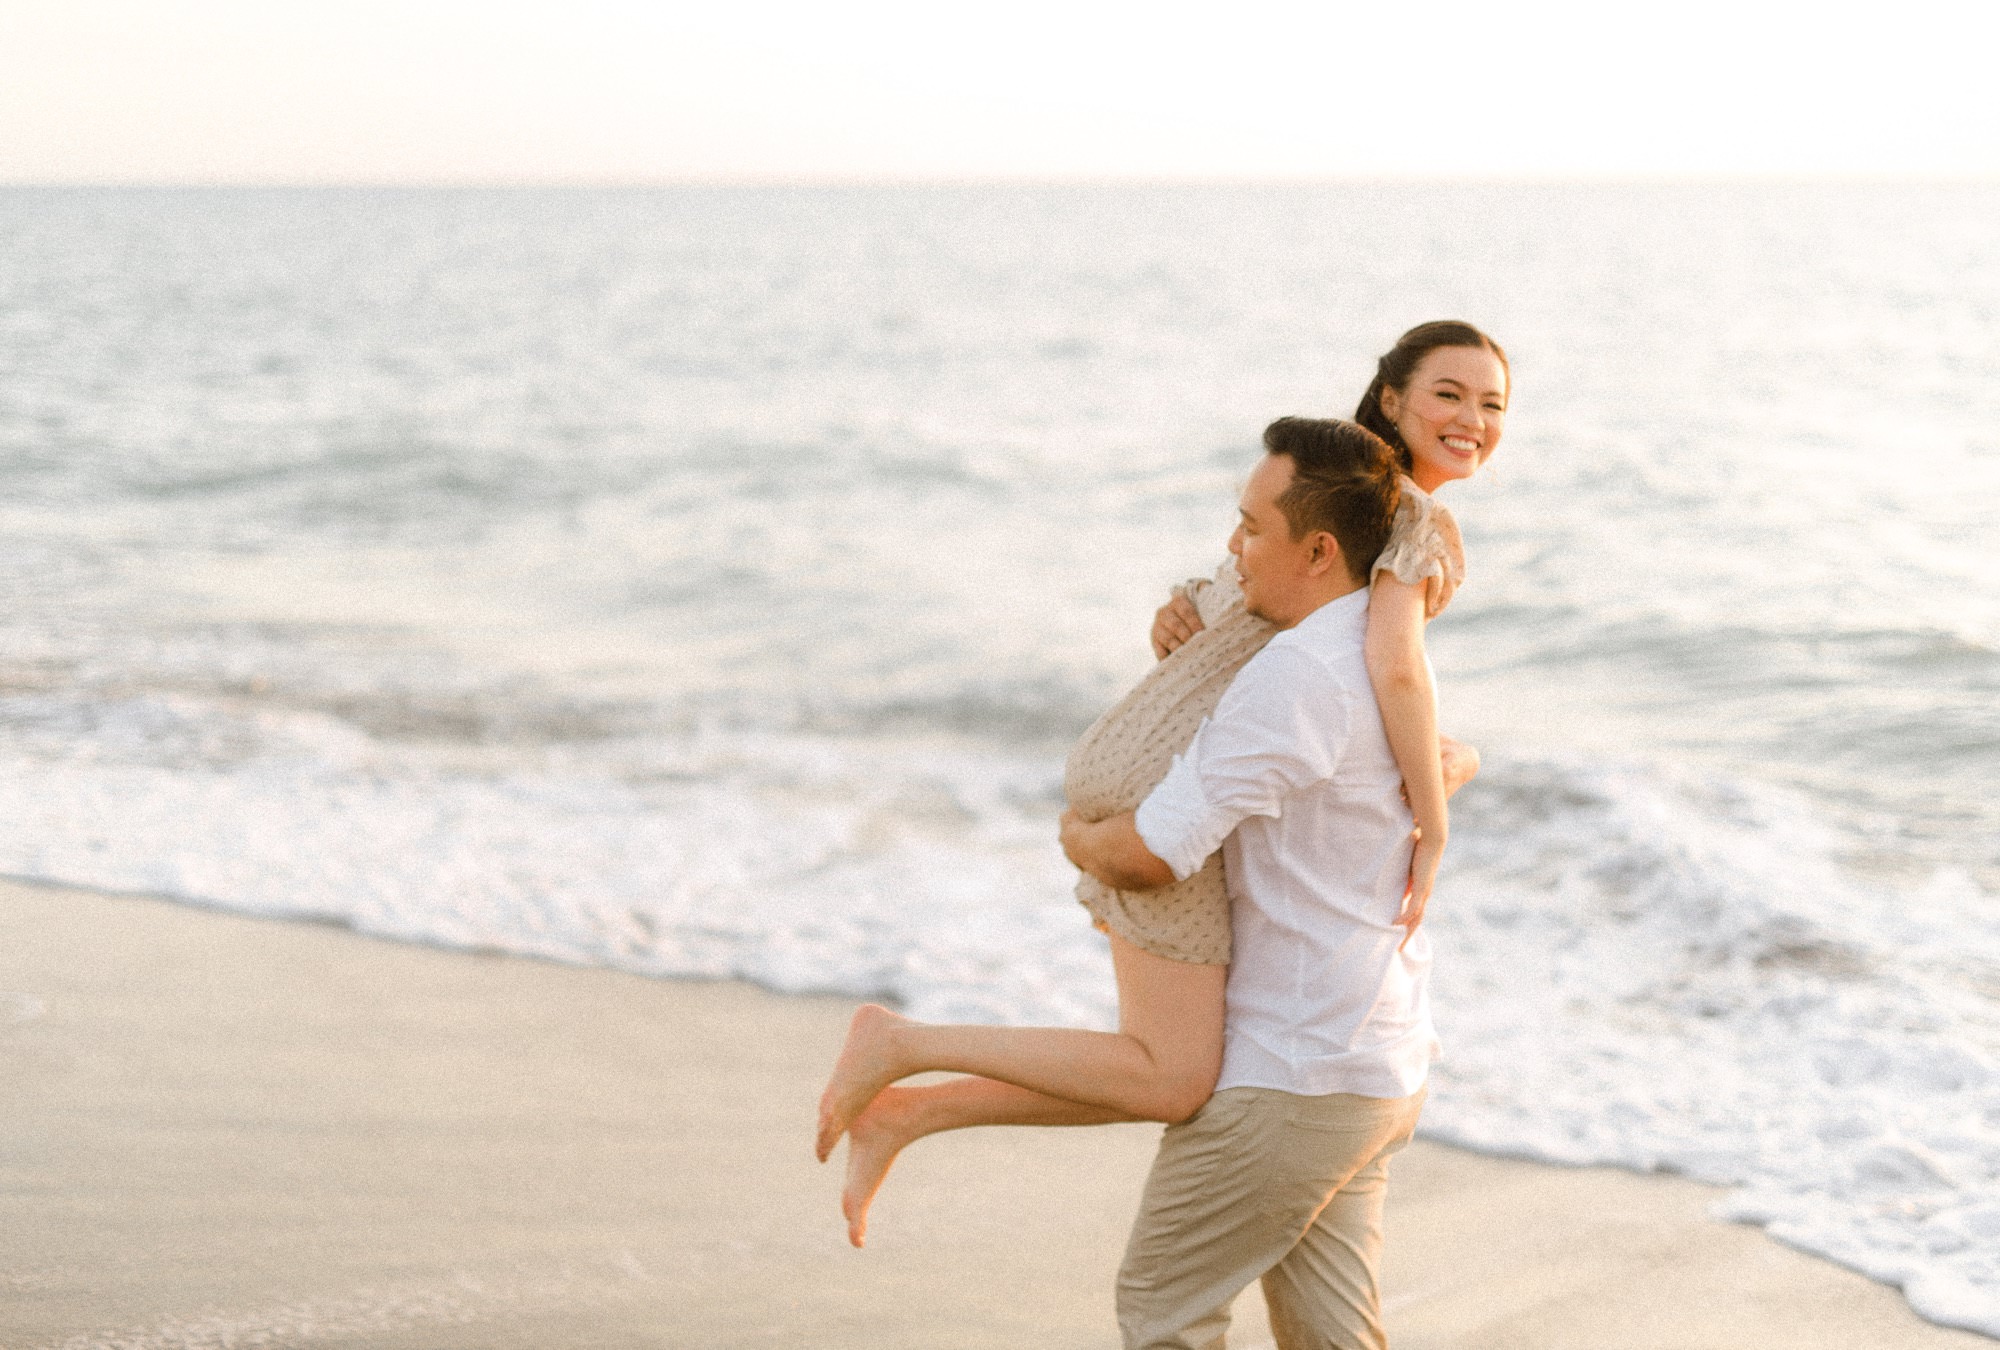 Guy carrying the girl during their prenup shoot